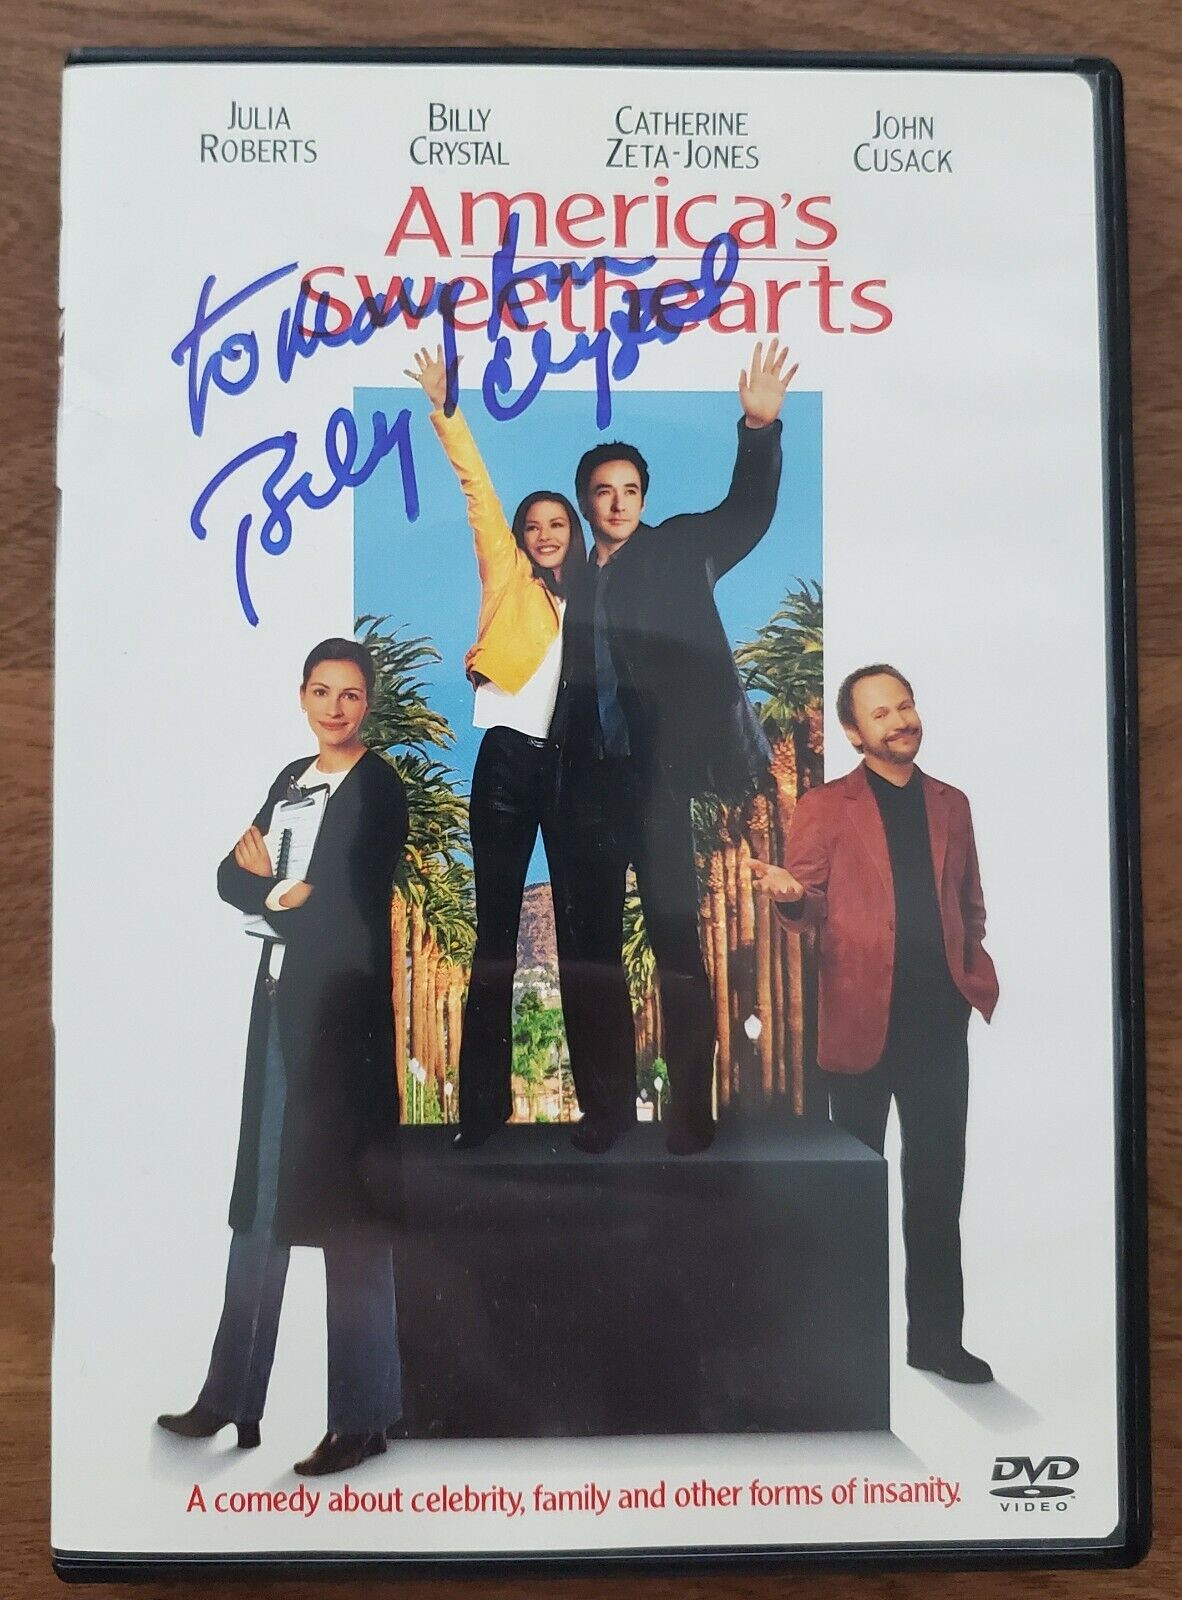 Billy Crystal Signed America's Sweethearts Dvd City Slickers Monsters Inc Rad